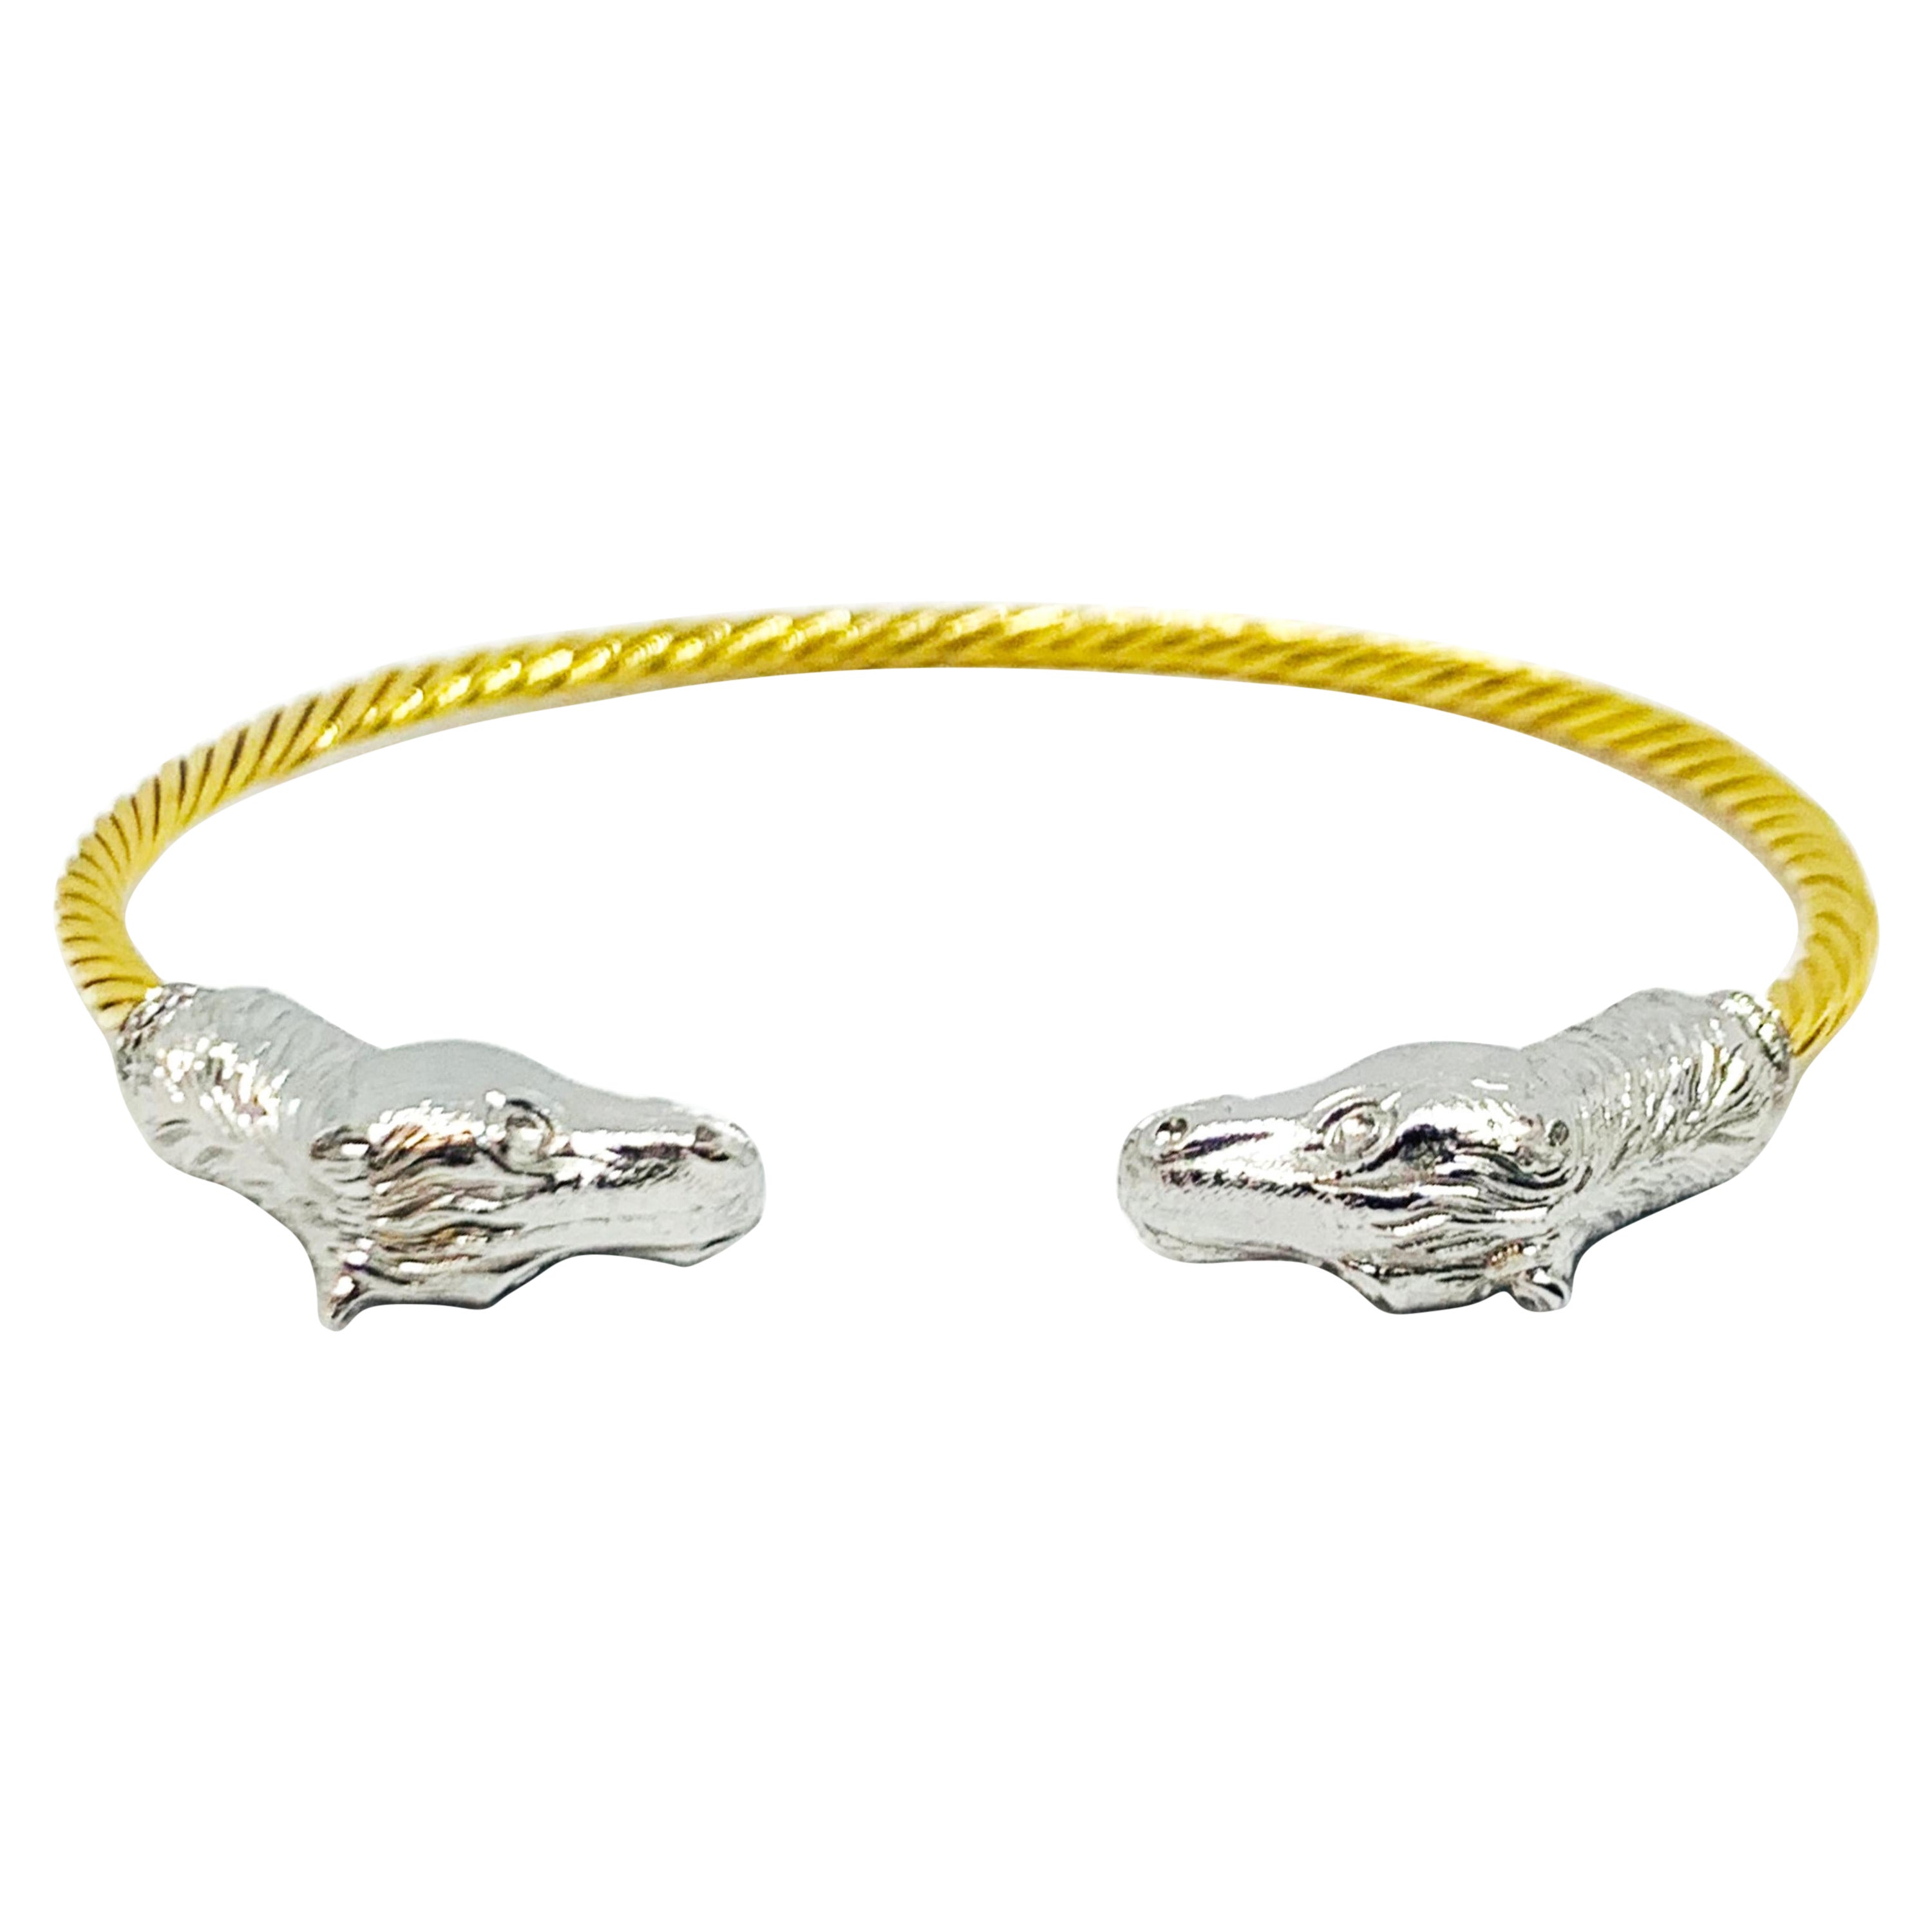 Rosior Bangle Bracelet set in White and Yellow Gold with Diamonds 